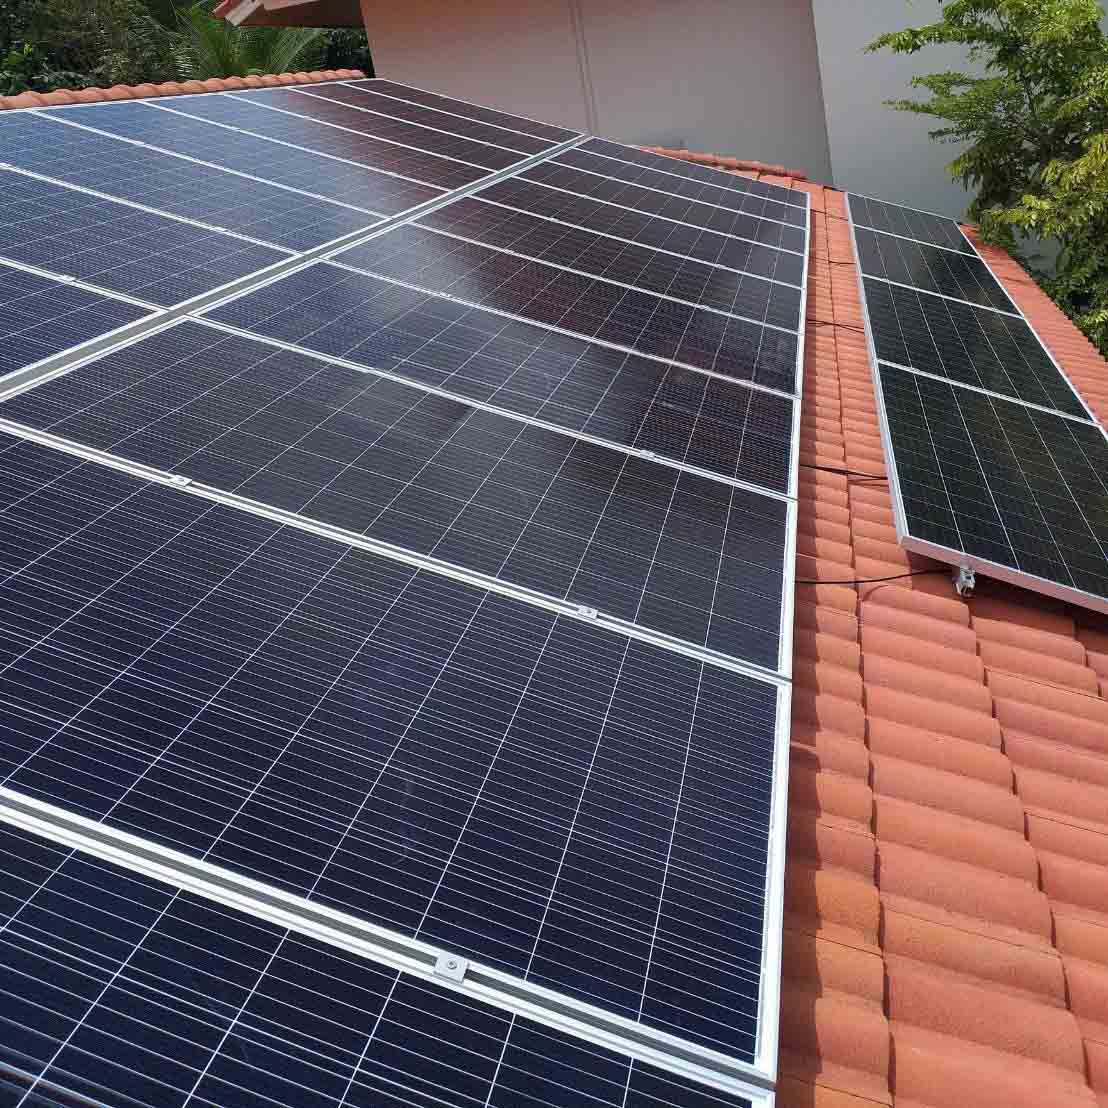 30kw roof solar system located in Thailand